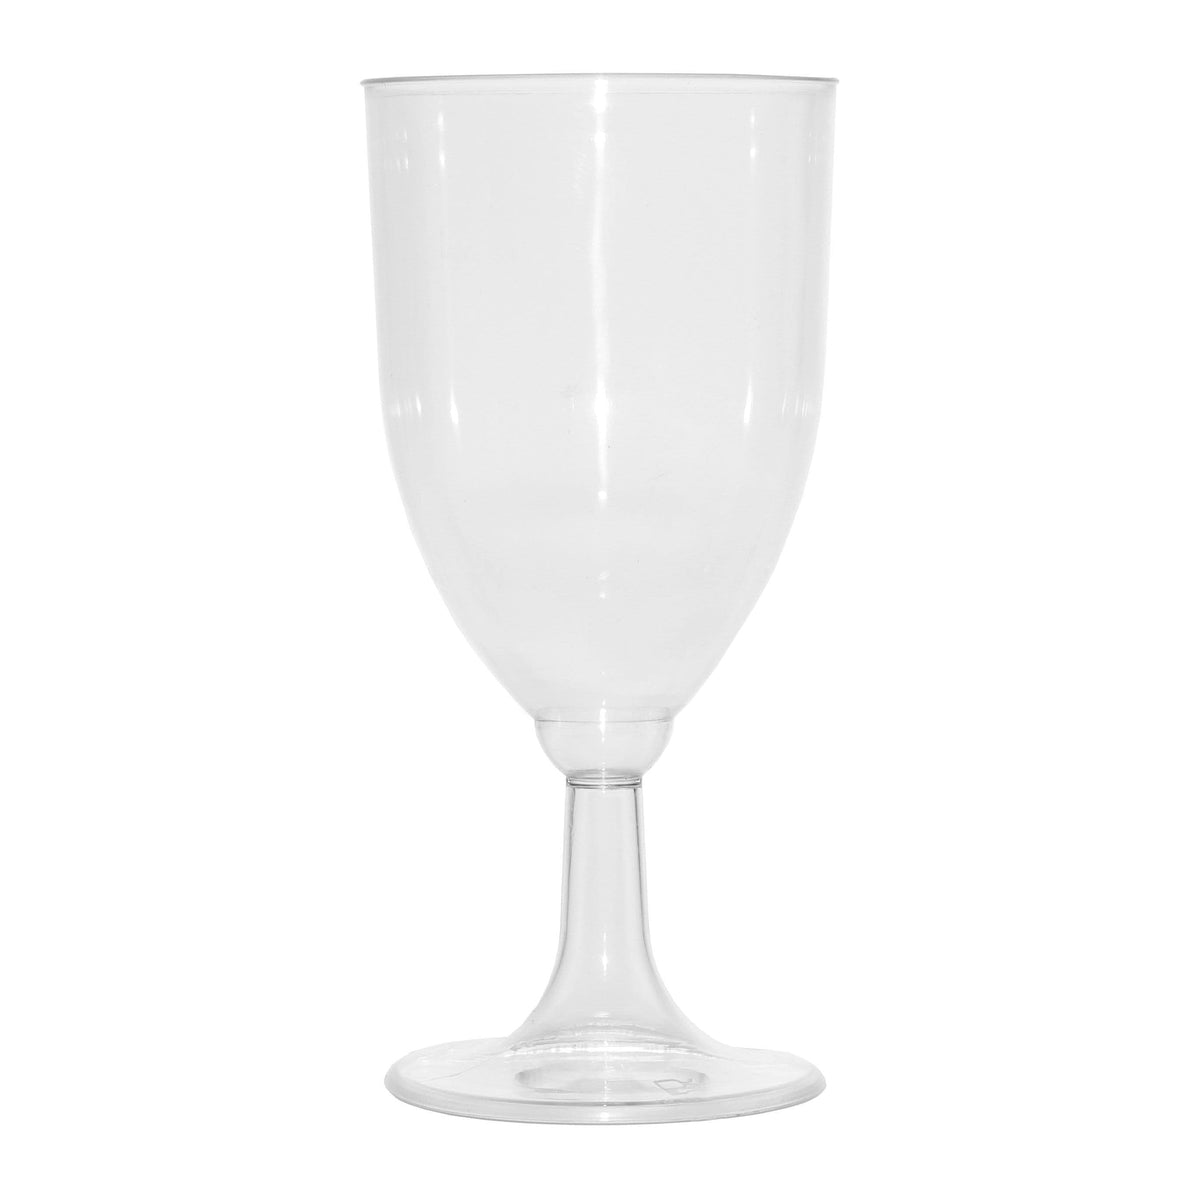 Buy Plasticware Wine Glasses 6/pkg. sold at Party Expert